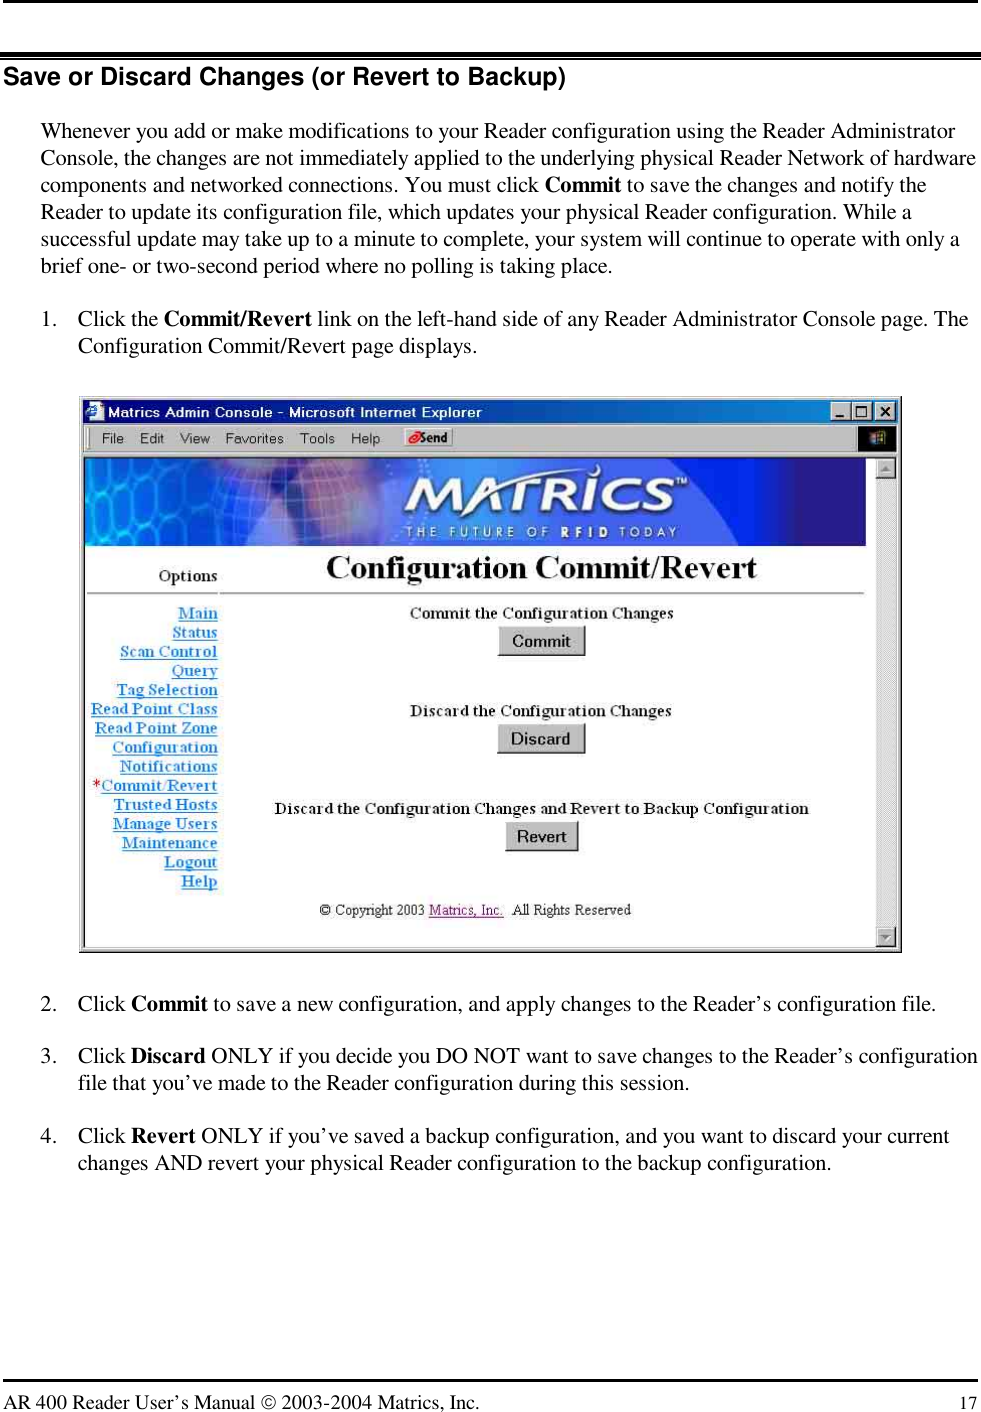   AR 400 Reader User’s Manual  2003-2004 Matrics, Inc.  17 Save or Discard Changes (or Revert to Backup) Whenever you add or make modifications to your Reader configuration using the Reader Administrator Console, the changes are not immediately applied to the underlying physical Reader Network of hardware components and networked connections. You must click Commit to save the changes and notify the Reader to update its configuration file, which updates your physical Reader configuration. While a successful update may take up to a minute to complete, your system will continue to operate with only a brief one- or two-second period where no polling is taking place. 1. Click the Commit/Revert link on the left-hand side of any Reader Administrator Console page. The Configuration Commit/Revert page displays.  2. Click Commit to save a new configuration, and apply changes to the Reader’s configuration file. 3. Click Discard ONLY if you decide you DO NOT want to save changes to the Reader’s configuration file that you’ve made to the Reader configuration during this session. 4. Click Revert ONLY if you’ve saved a backup configuration, and you want to discard your current changes AND revert your physical Reader configuration to the backup configuration. 